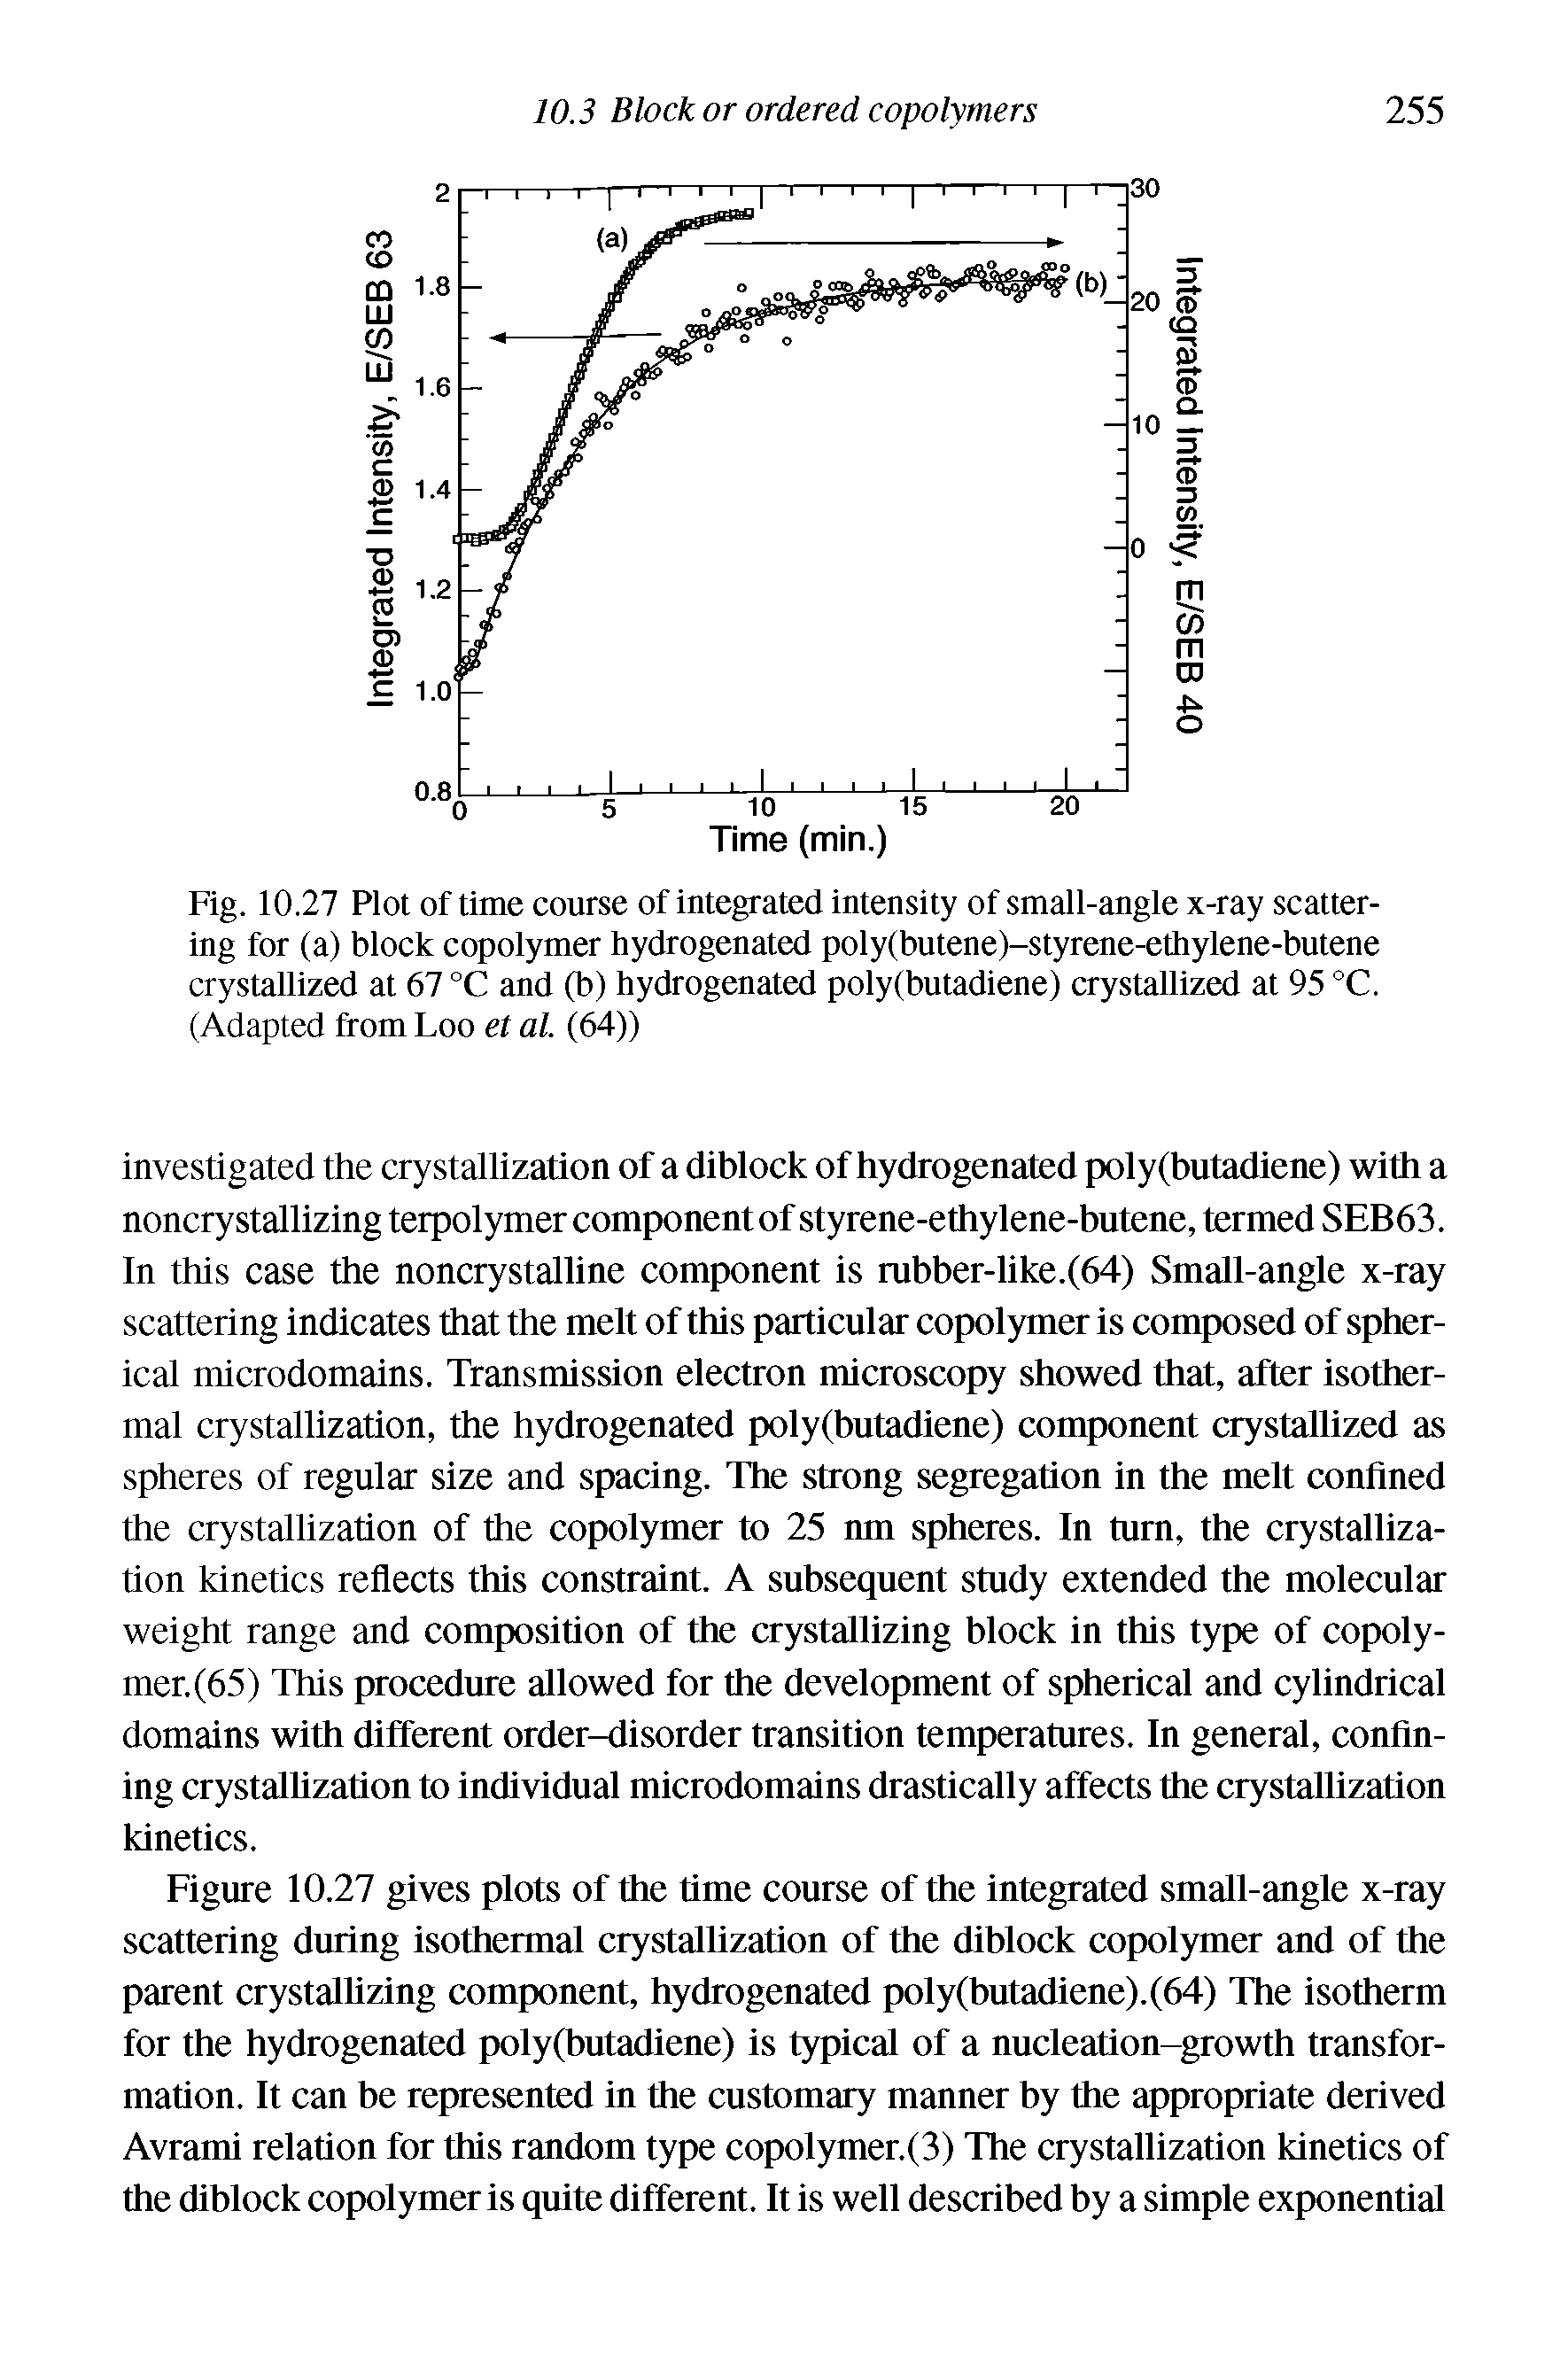 Fig. 10.27 Plot of time course of integrated intensity of small-angle x-ray scattering for (a) block copolymer hydrogenated poly(butene)-styrene-ethylene-butene crystallized at 67 °C and (b) hydrogenated poly(butadiene) crystallized at 95 °C. (Adapted from Loo et al. (64))...